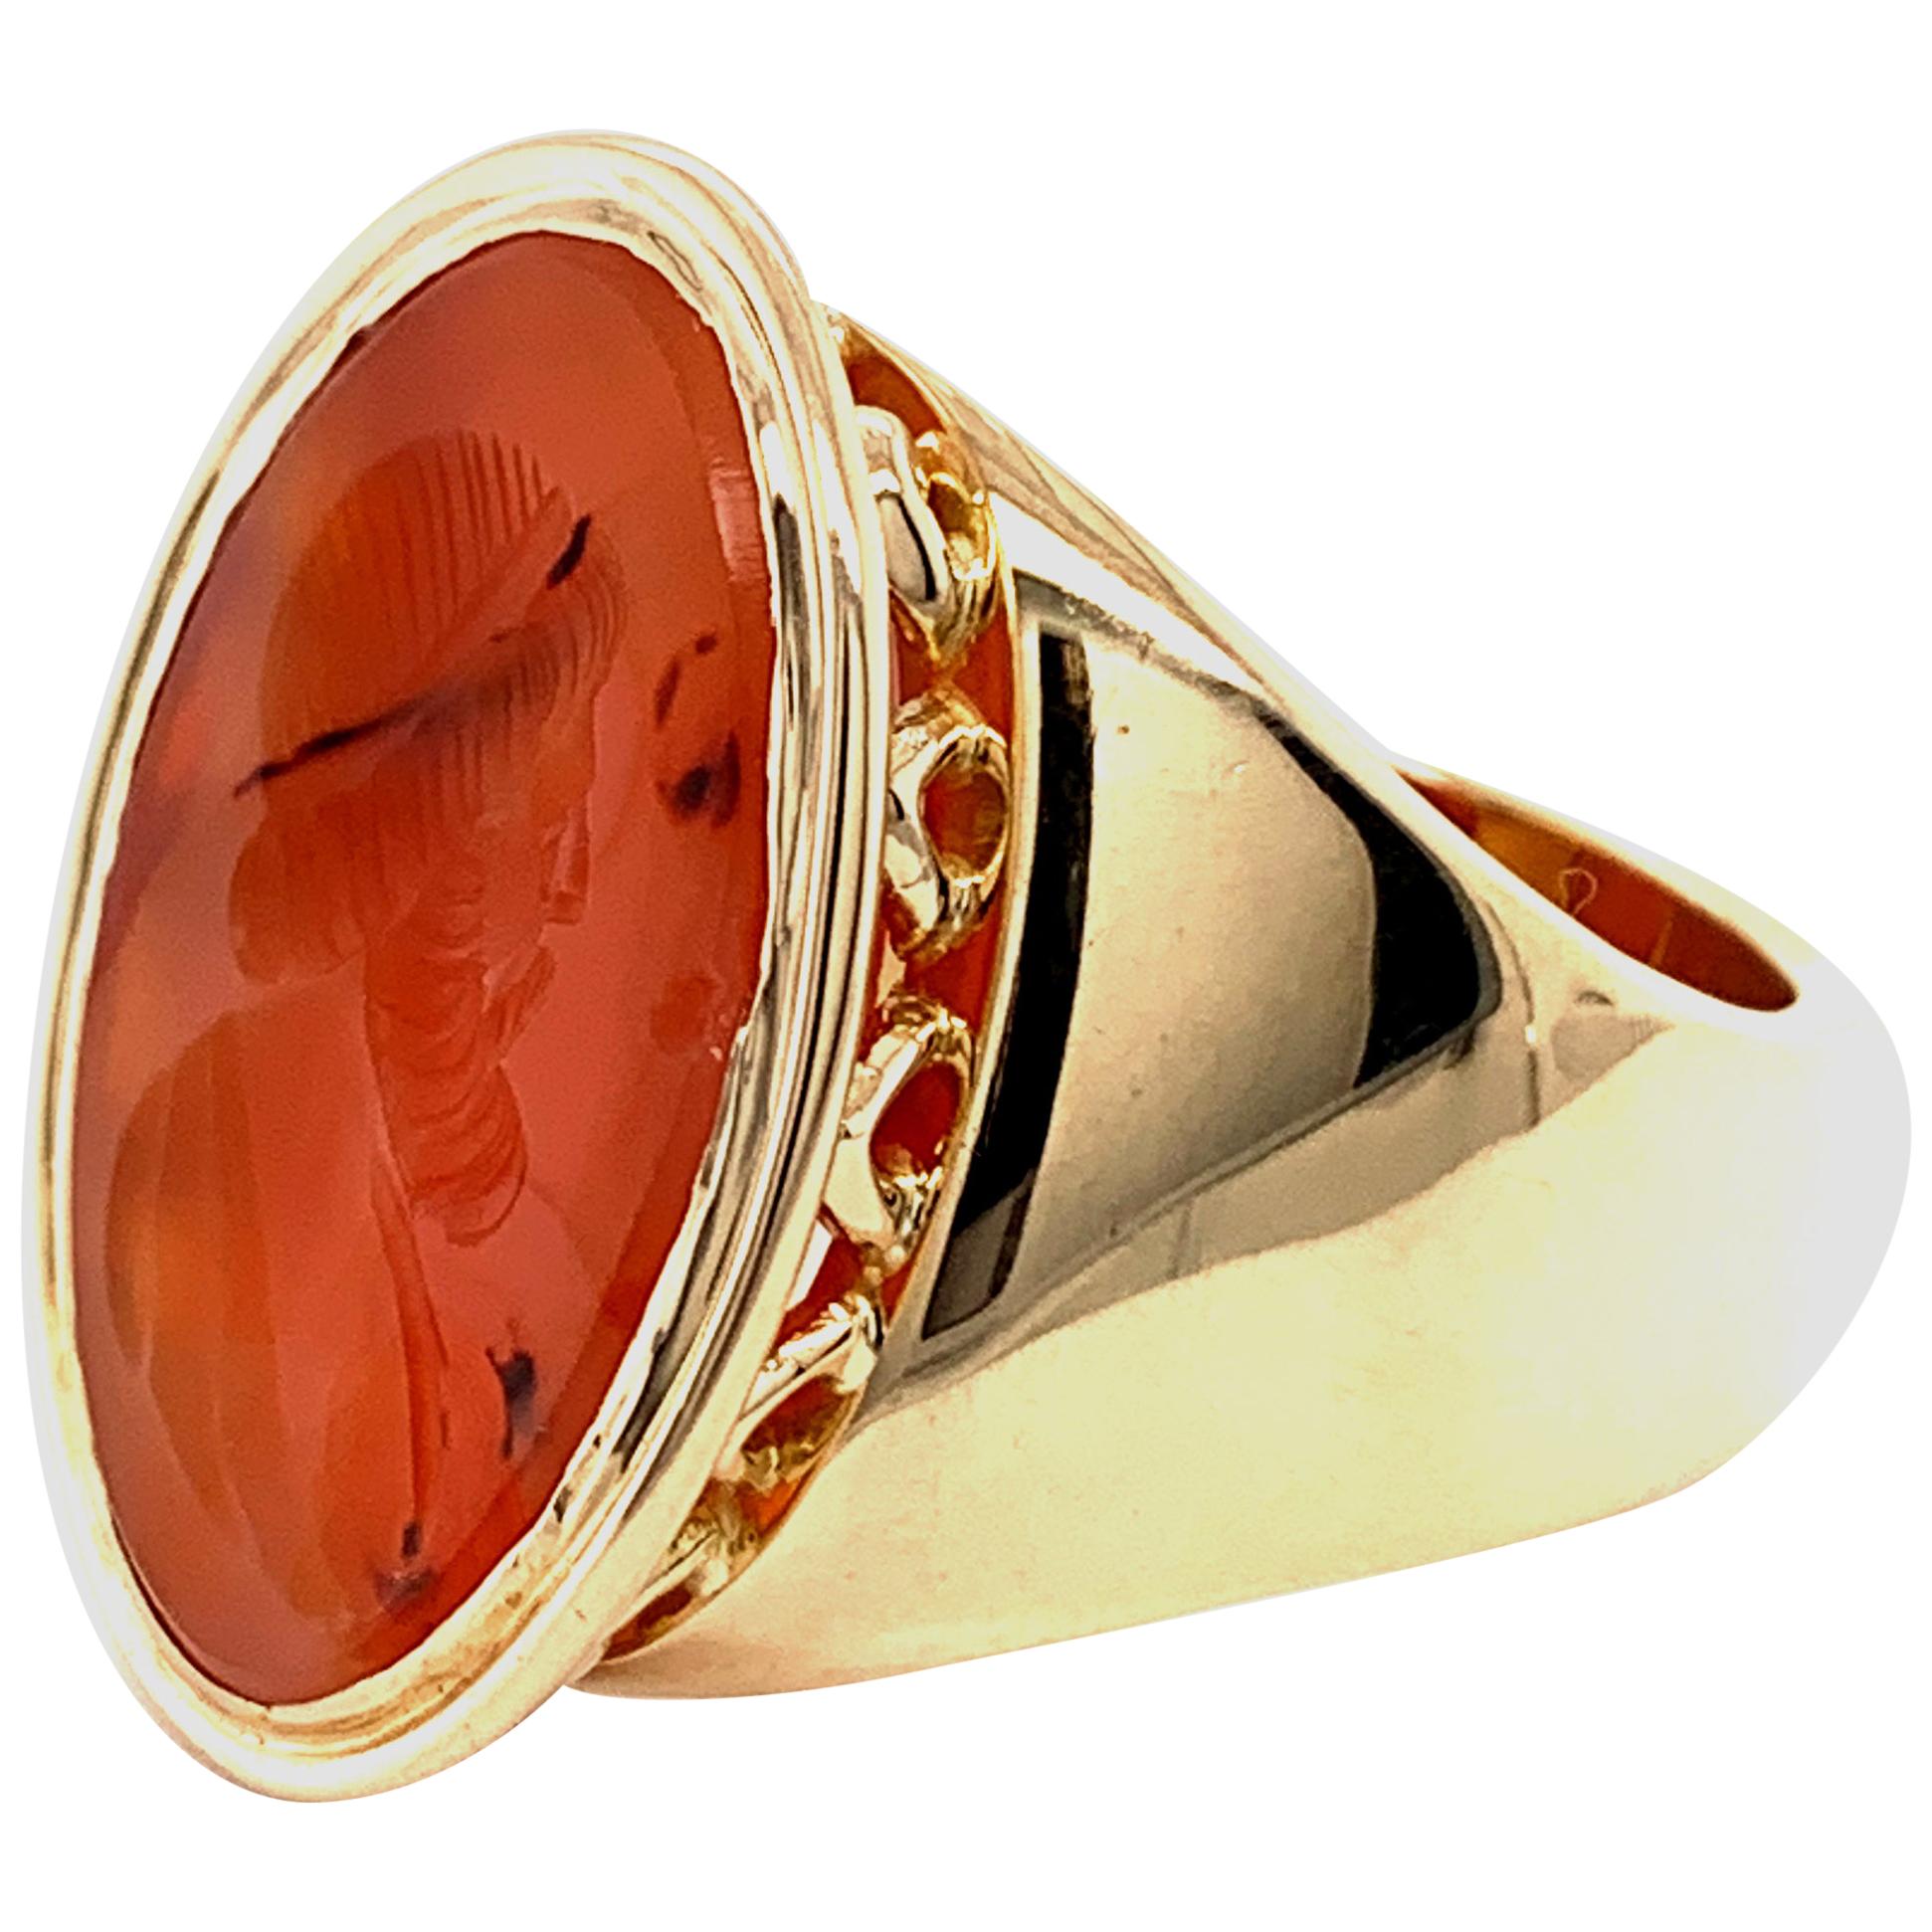 Spectacular Gold and Carnelian Crest Ring